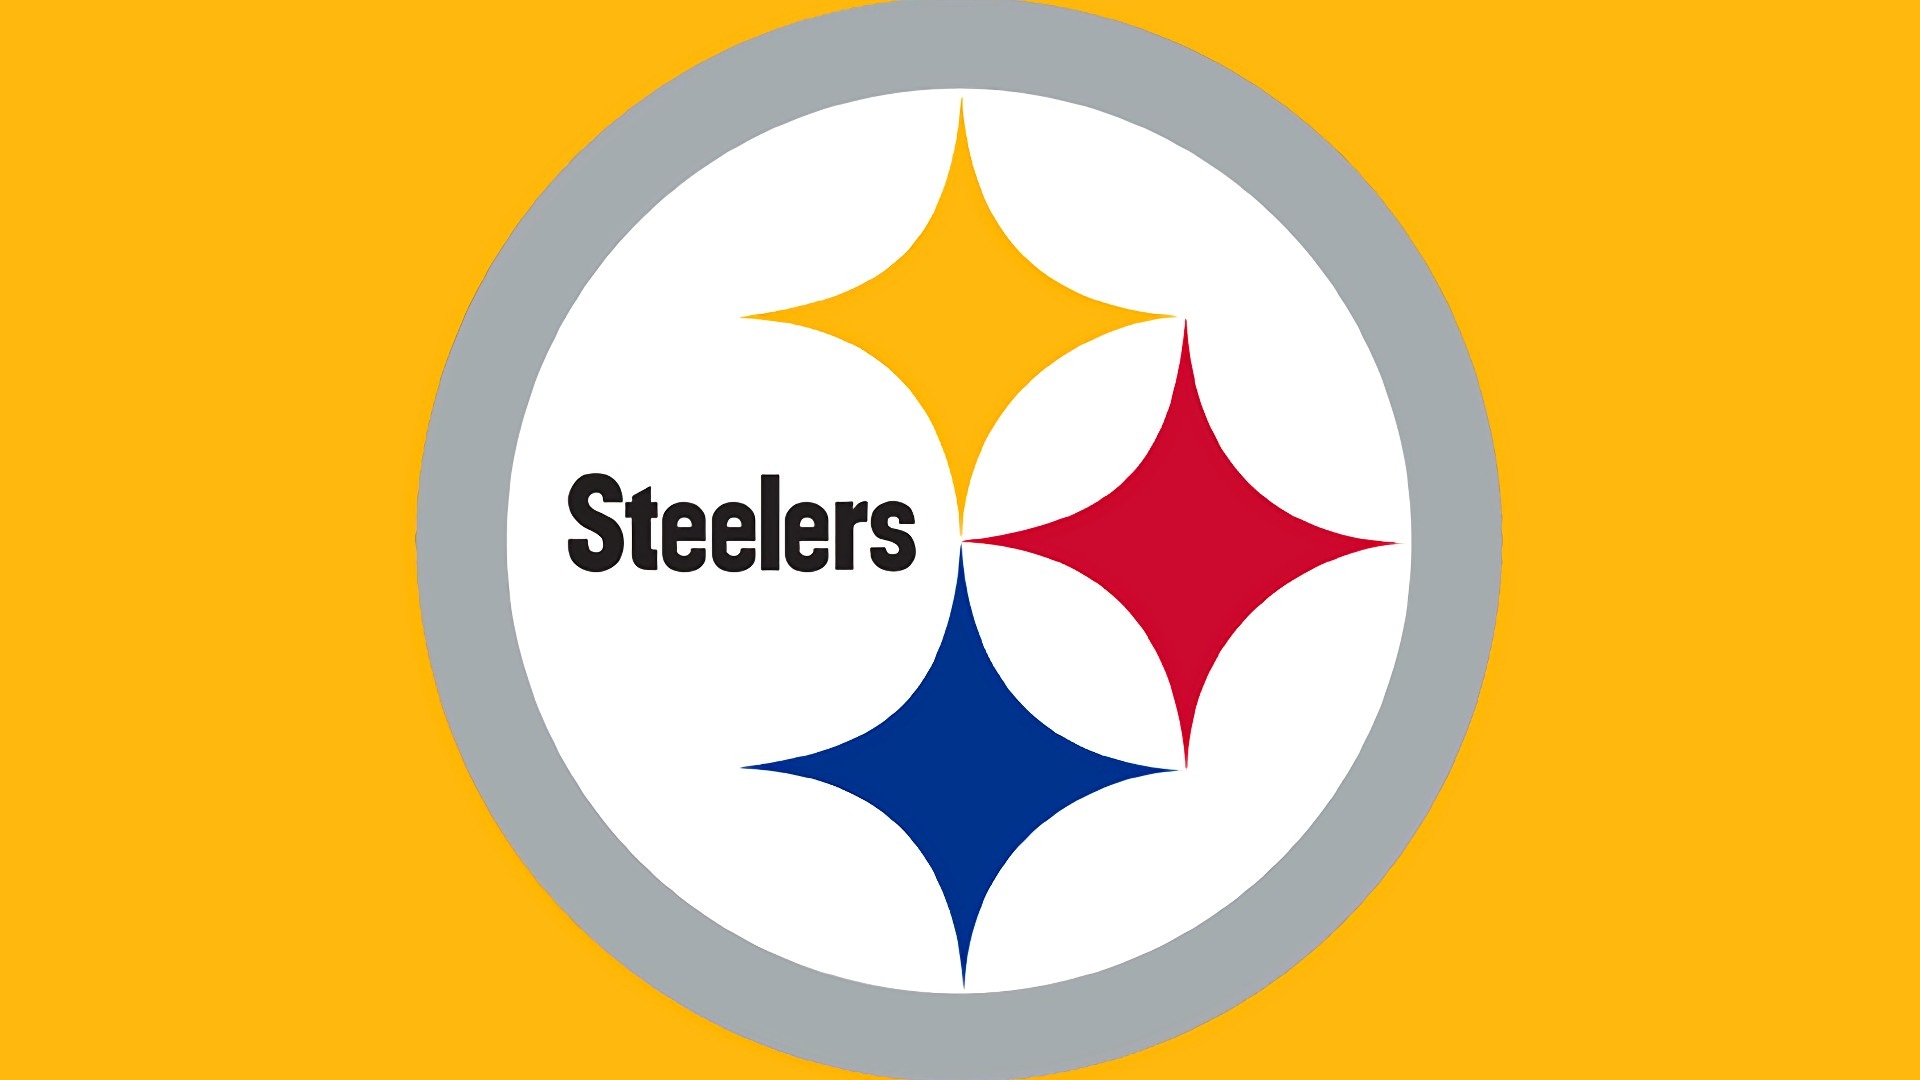 Steelers Logo Wallpaper With Resolution 1920X1080 pixel. You can make this wallpaper for your Mac or Windows Desktop Background, iPhone, Android or Tablet and another Smartphone device for free